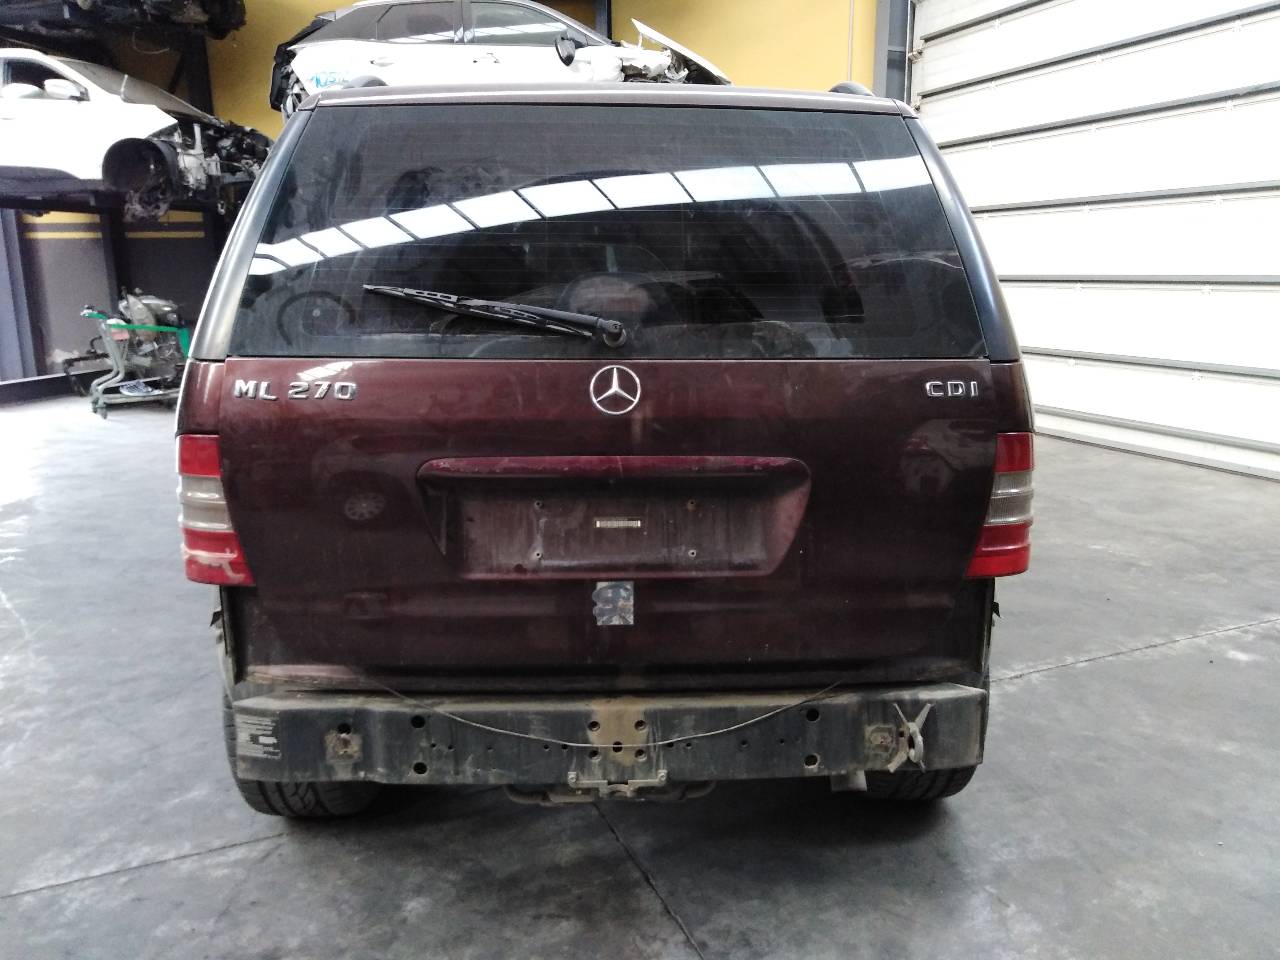 MERCEDES-BENZ M-Class W163 (1997-2005) Other Body Parts 23290134